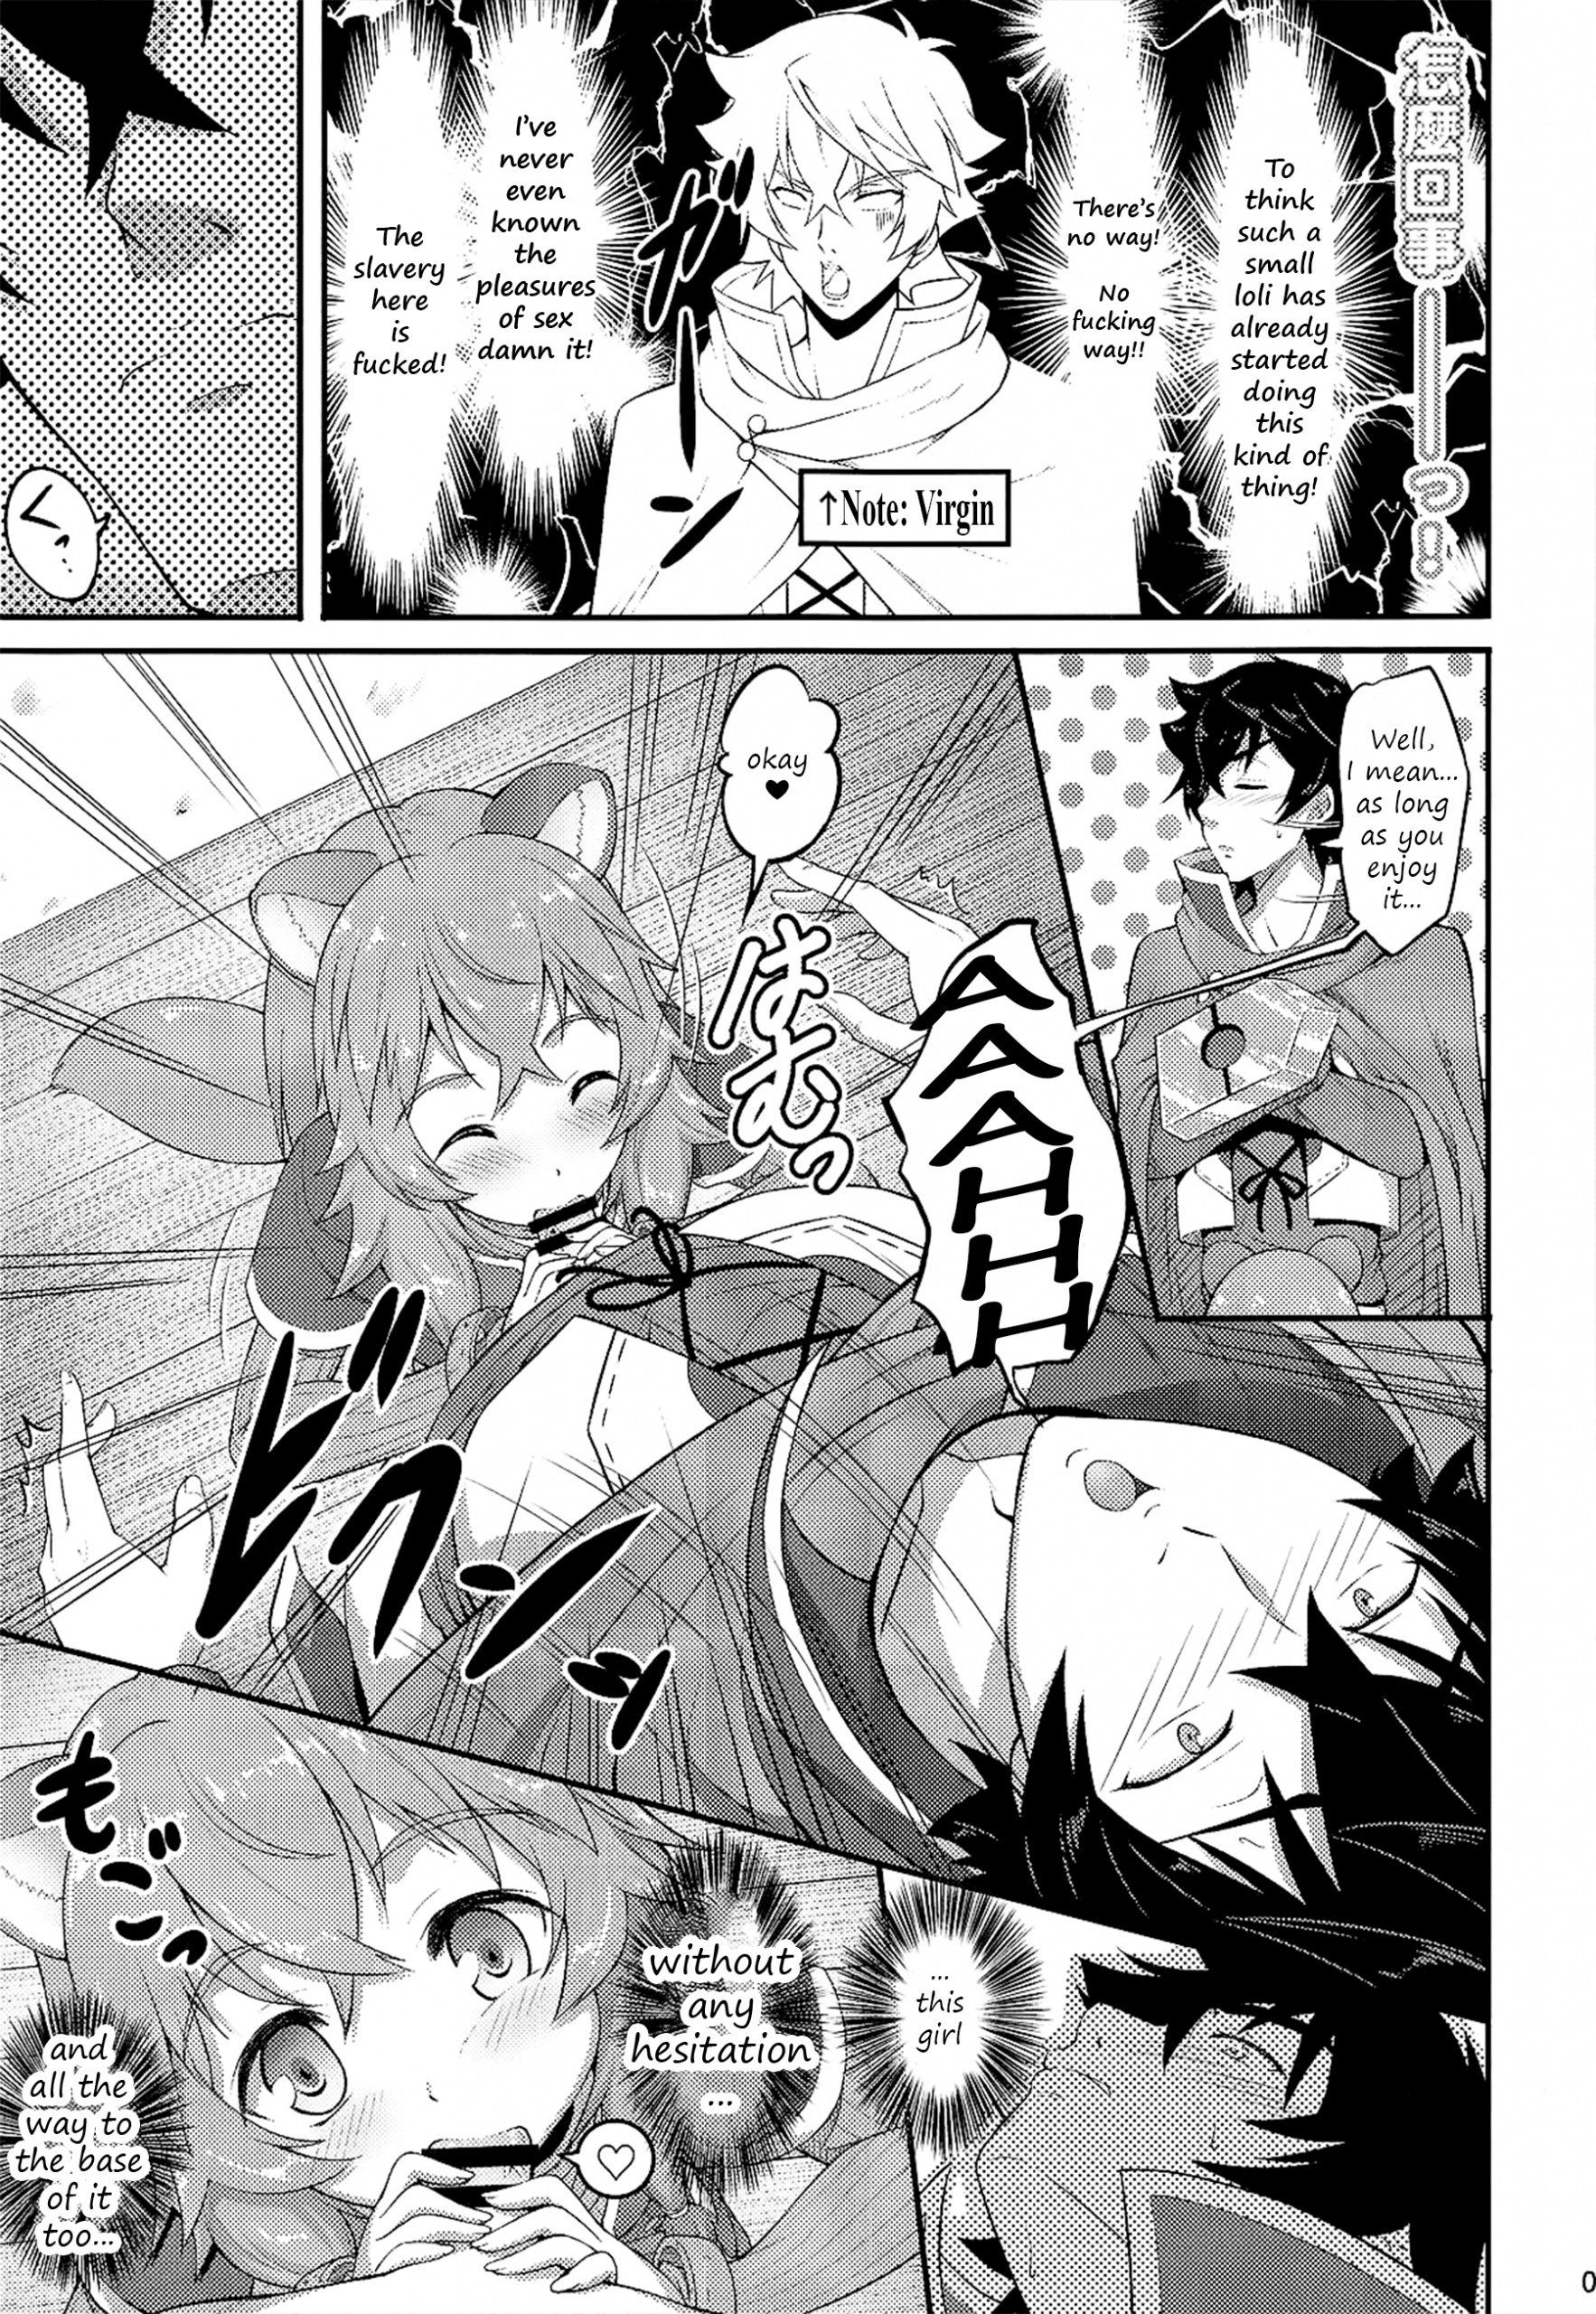 Slave's Girl of Level 1 hentai manga picture 6